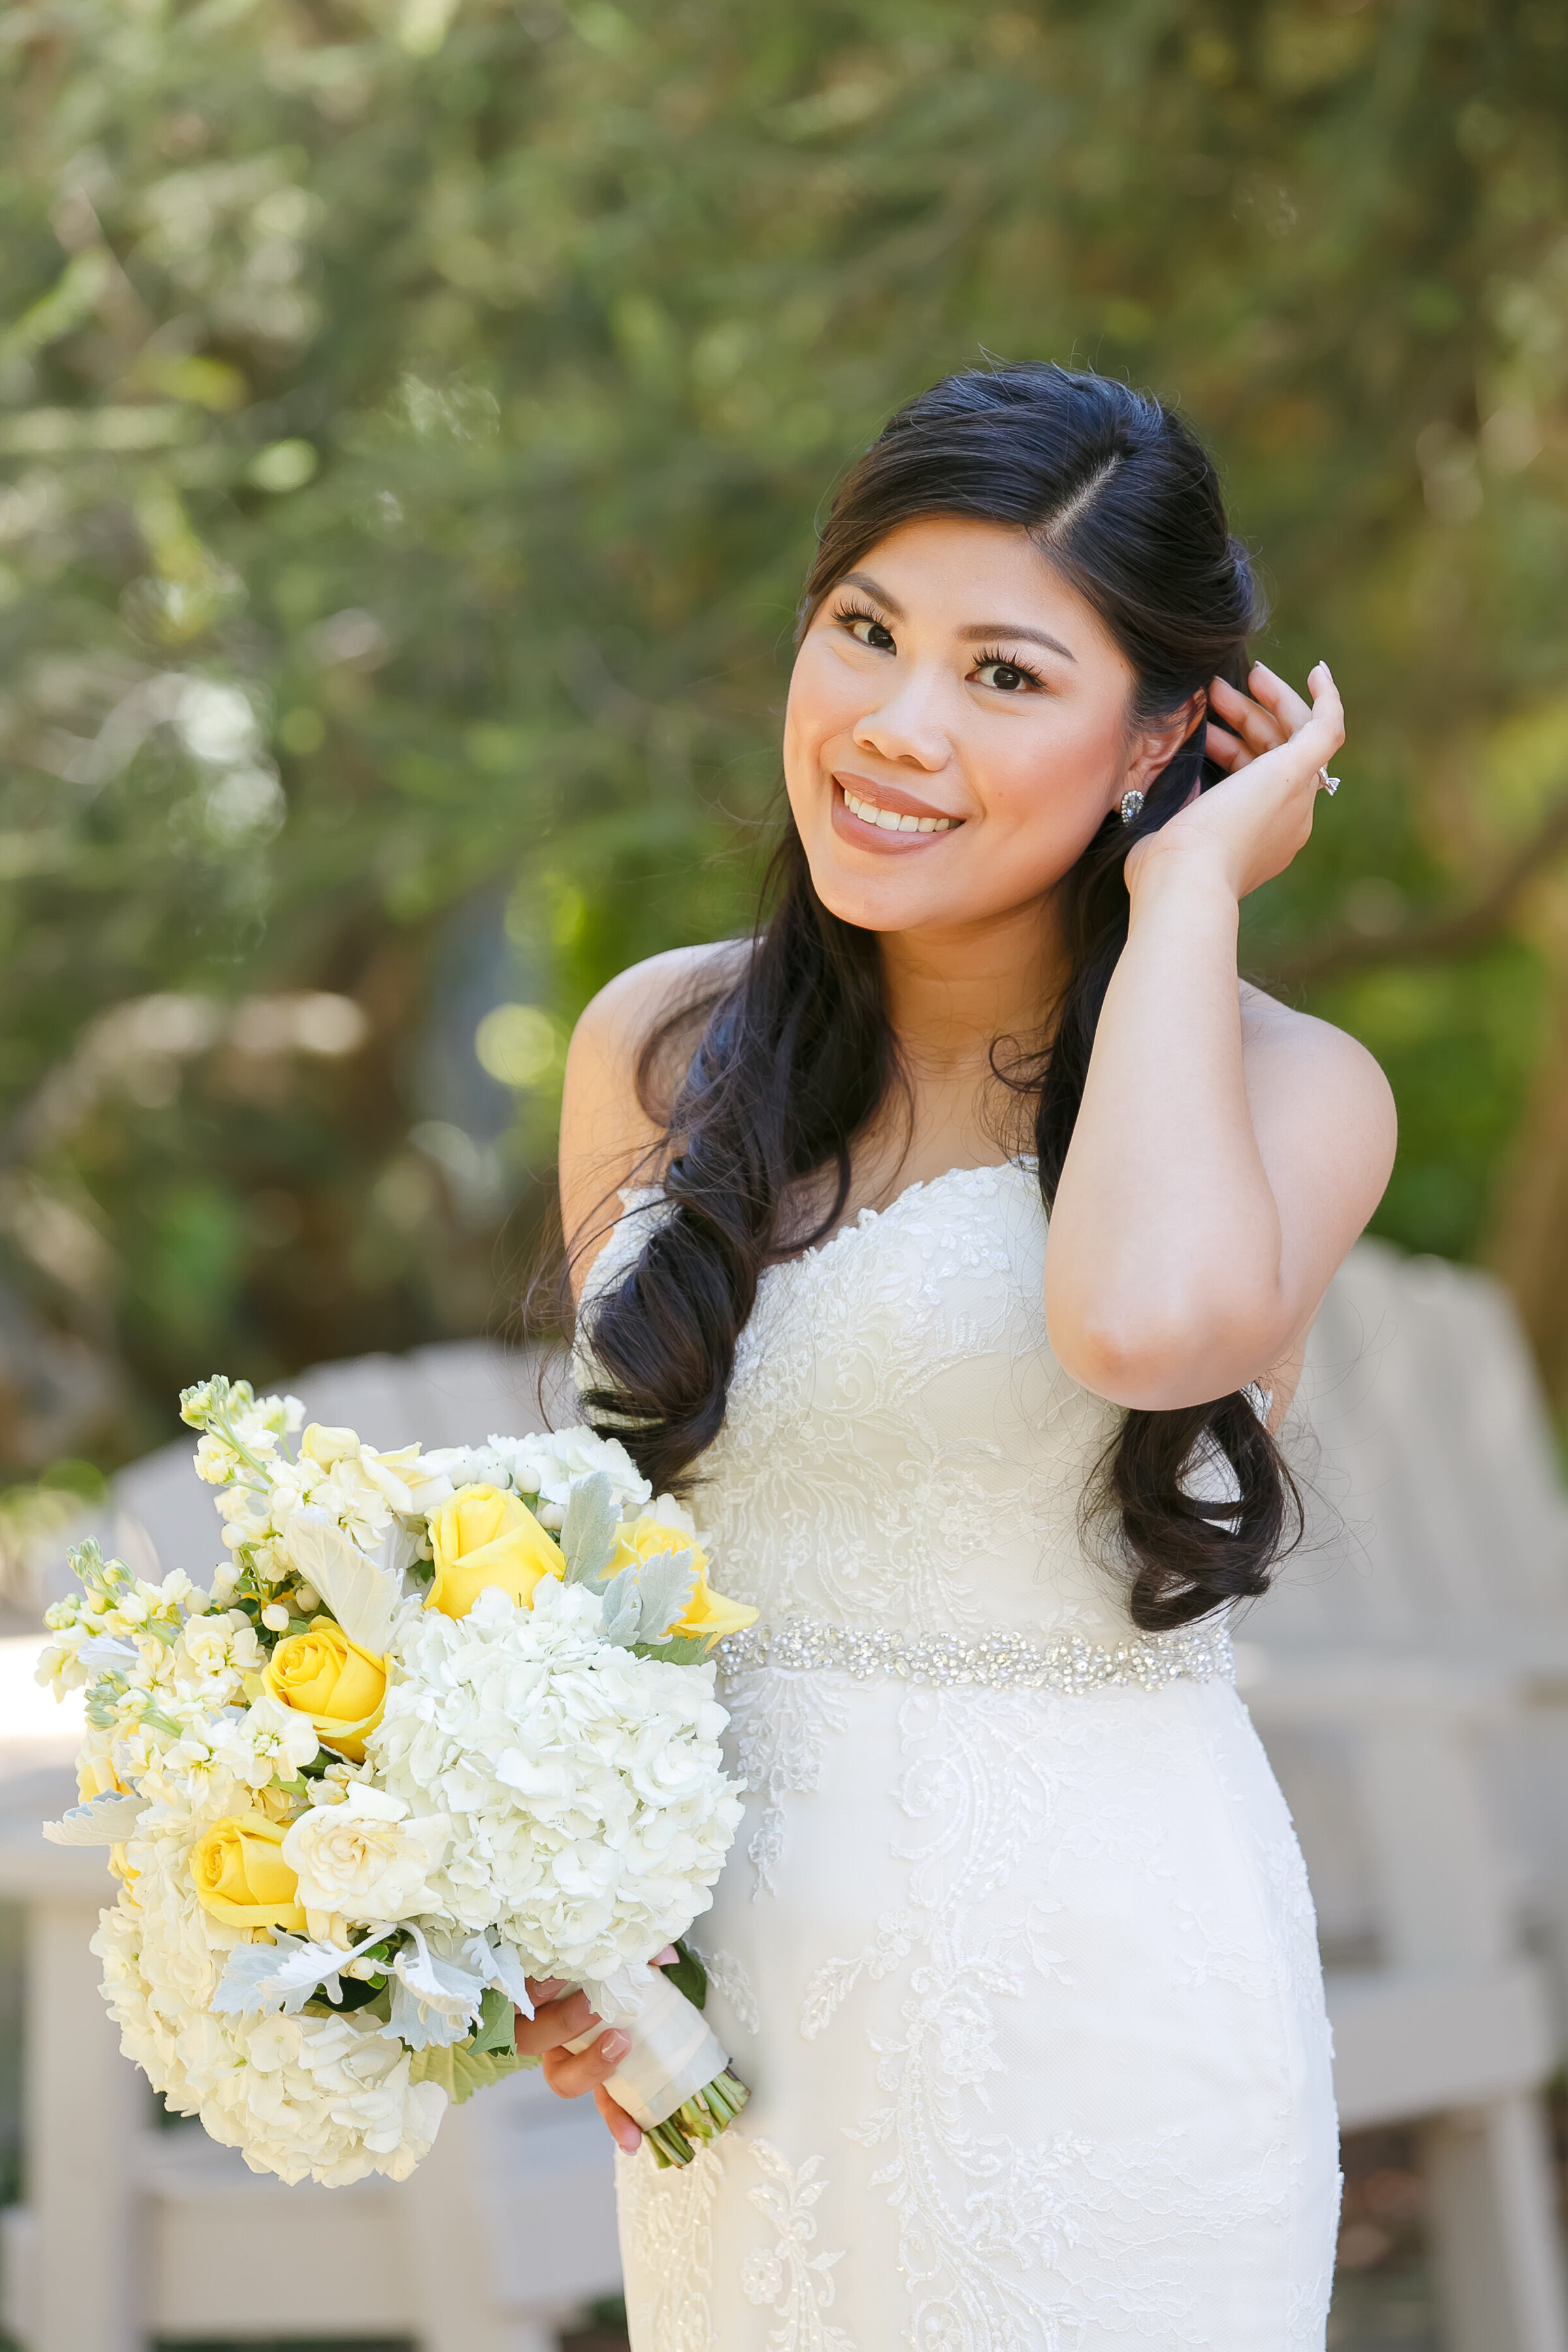 A woman in a white dress holds a bouquet of flowers.